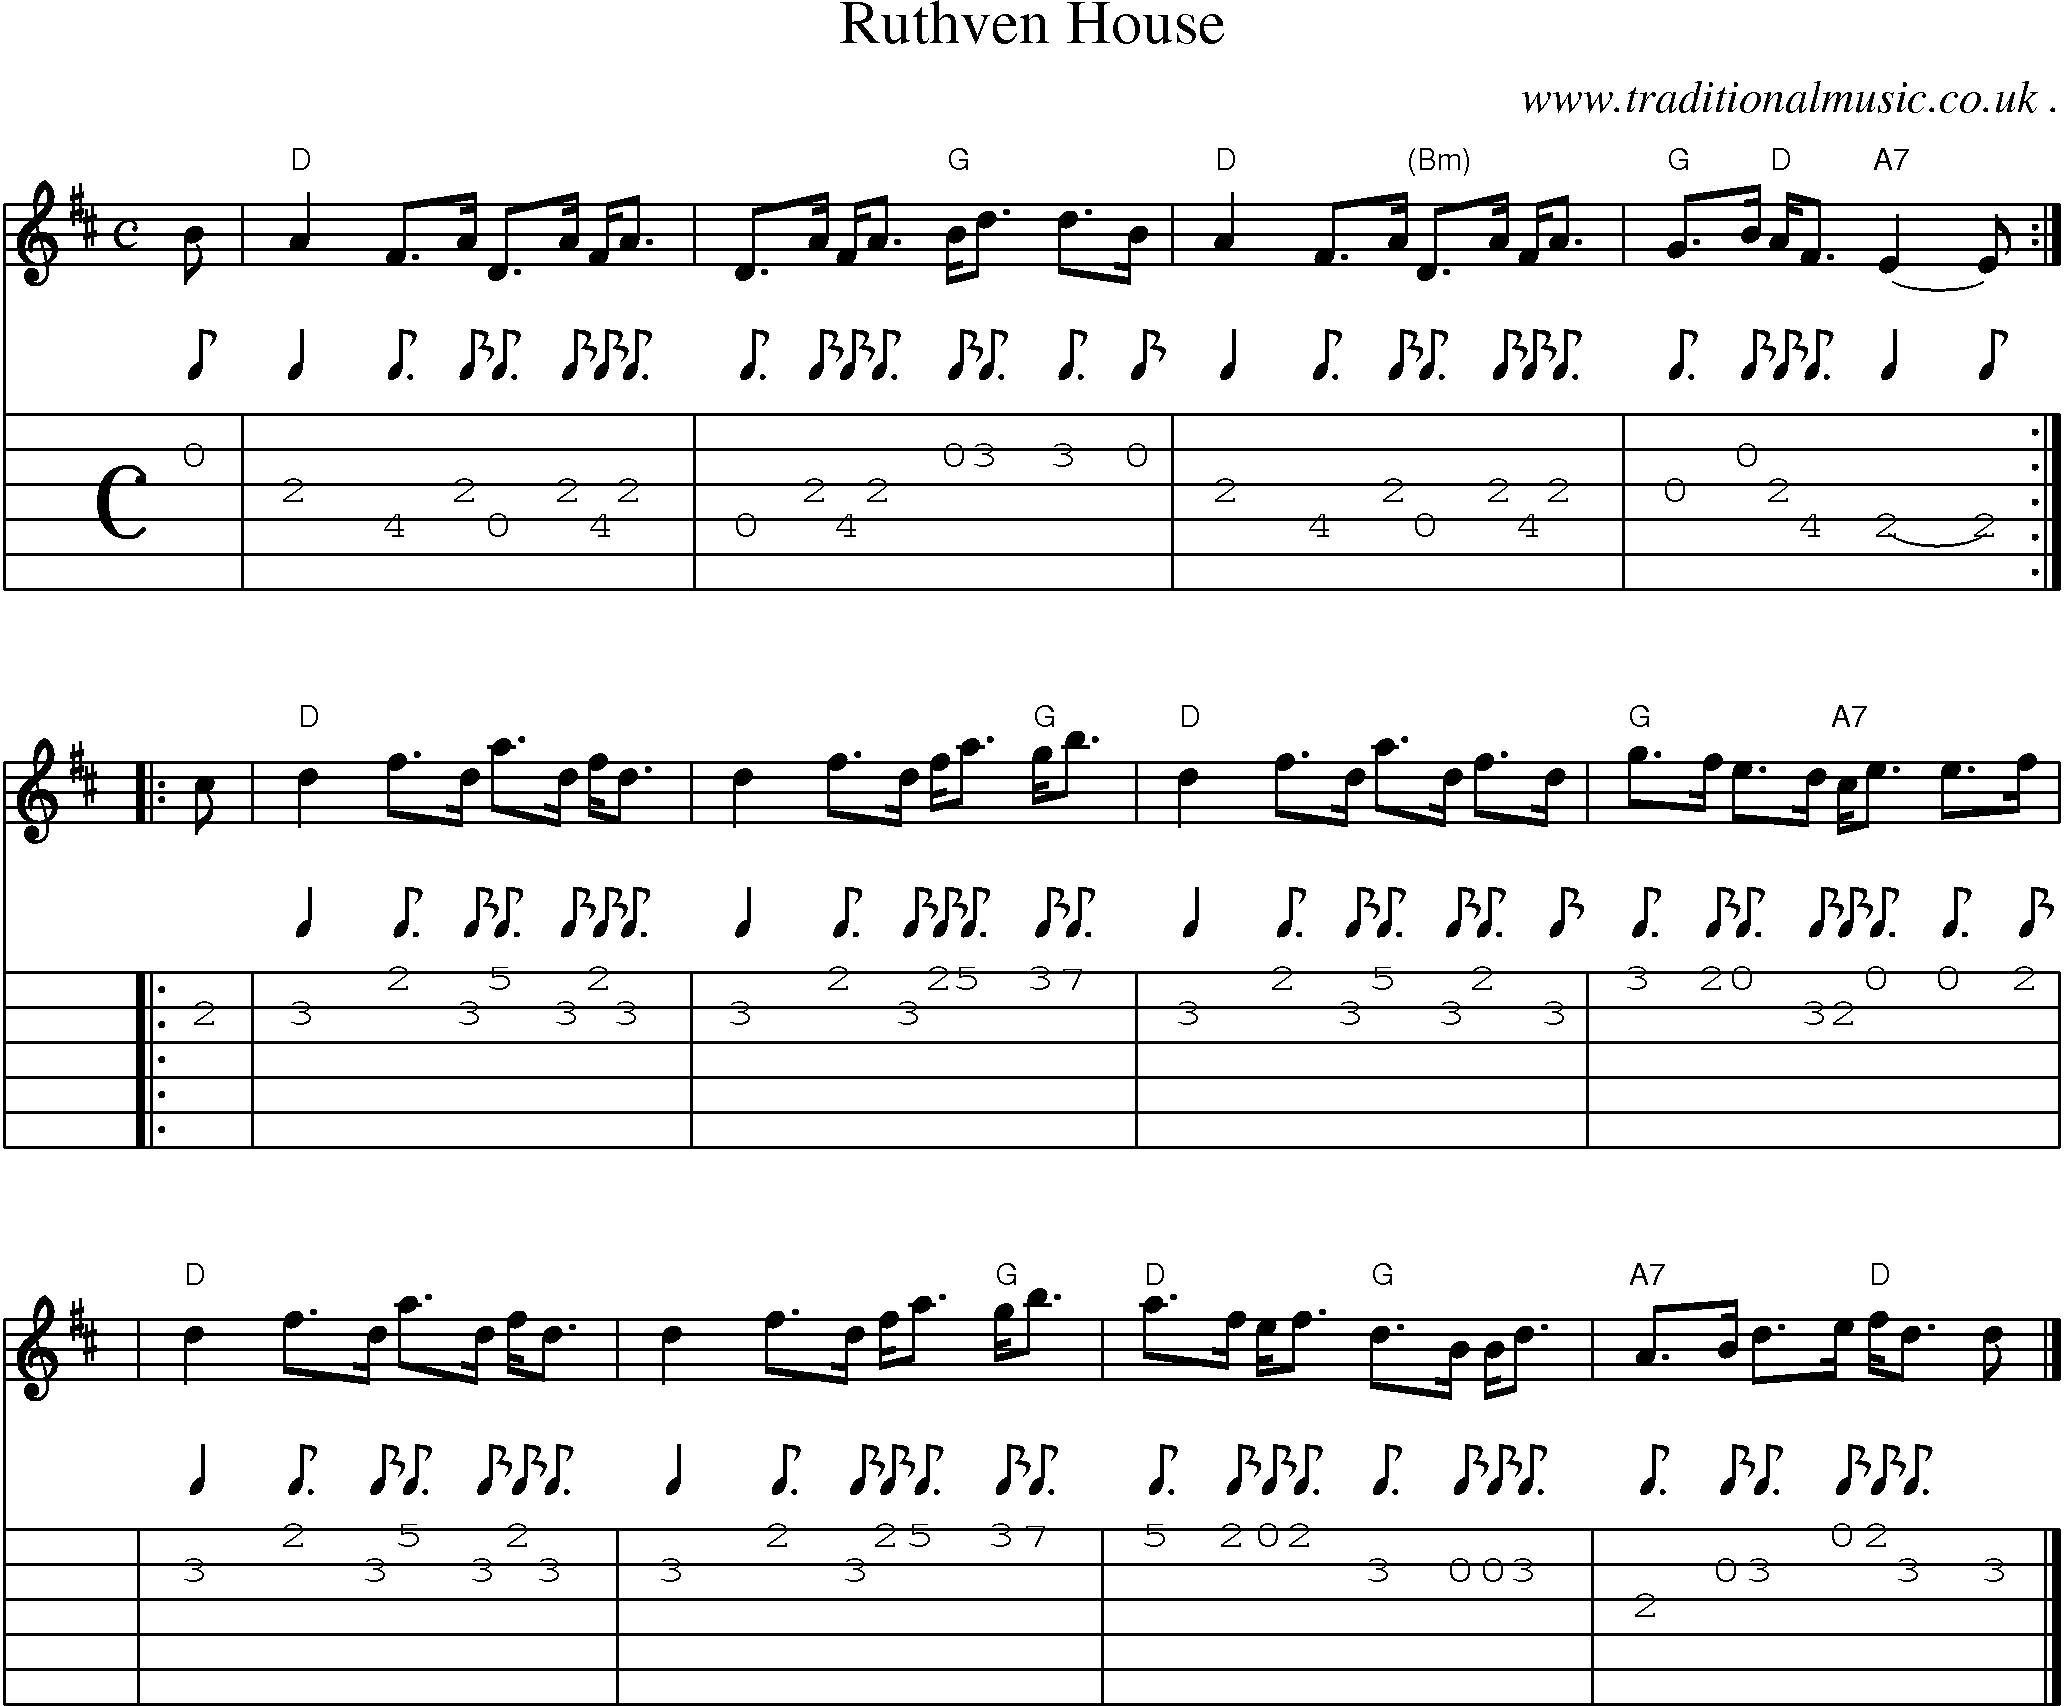 Sheet-music  score, Chords and Guitar Tabs for Ruthven House